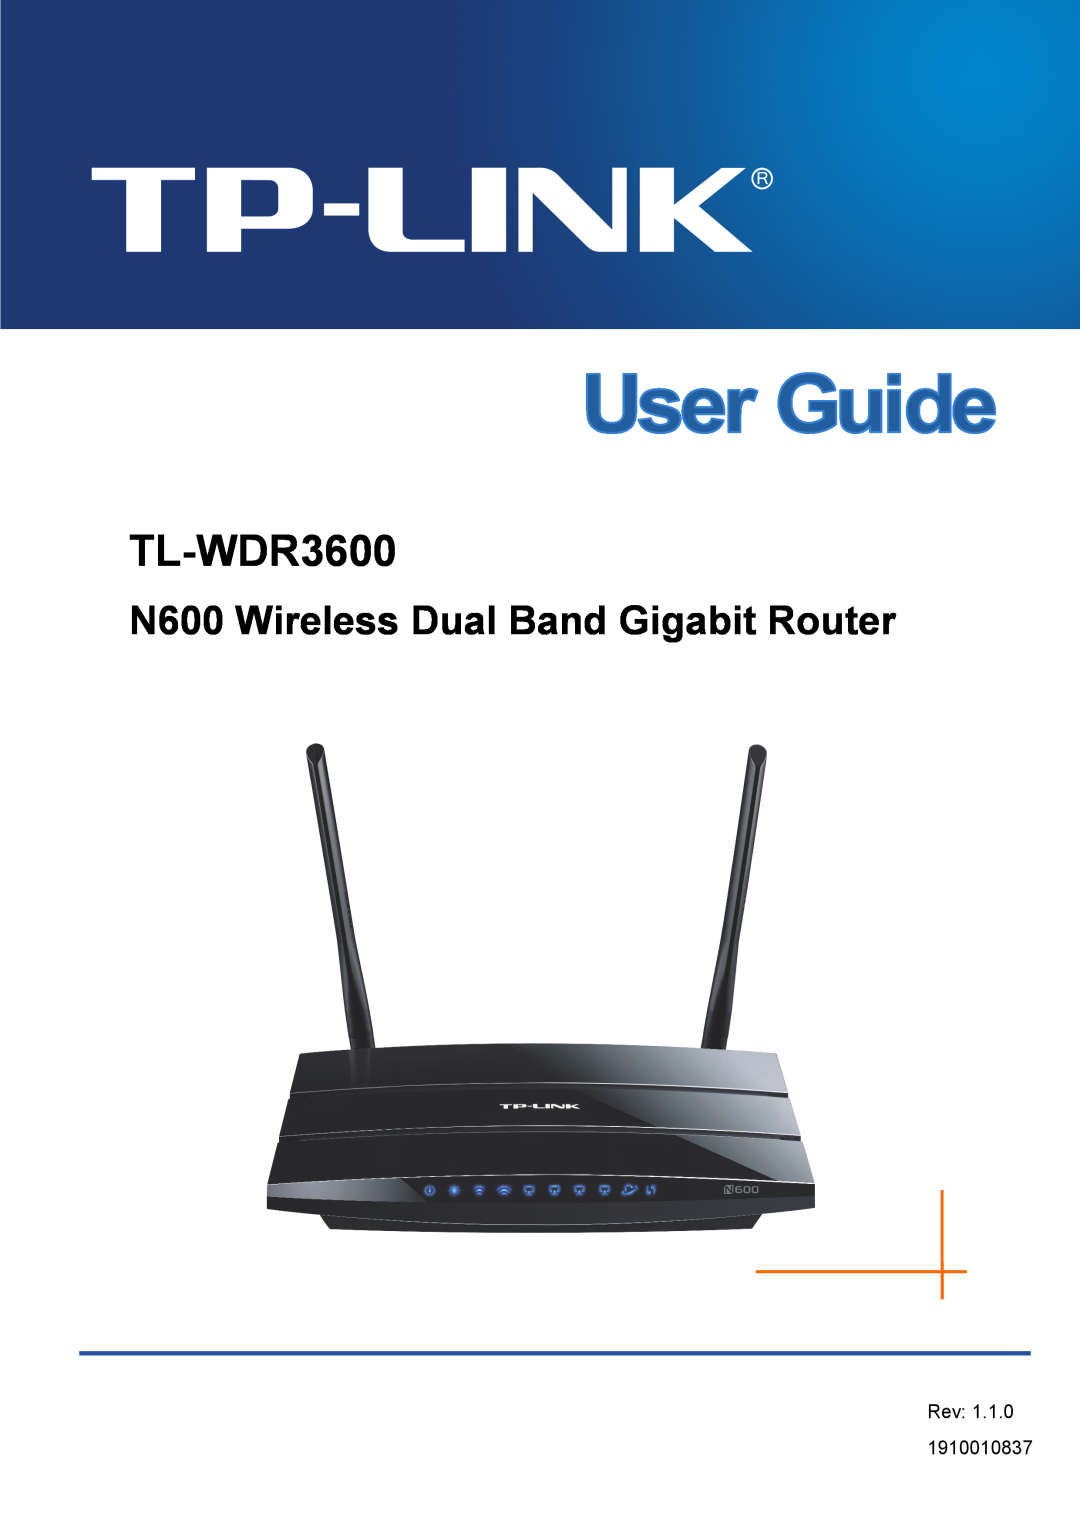 TP-Link TL-WDR3600 manual N600 Wireless Dual Band Gigabit Router 